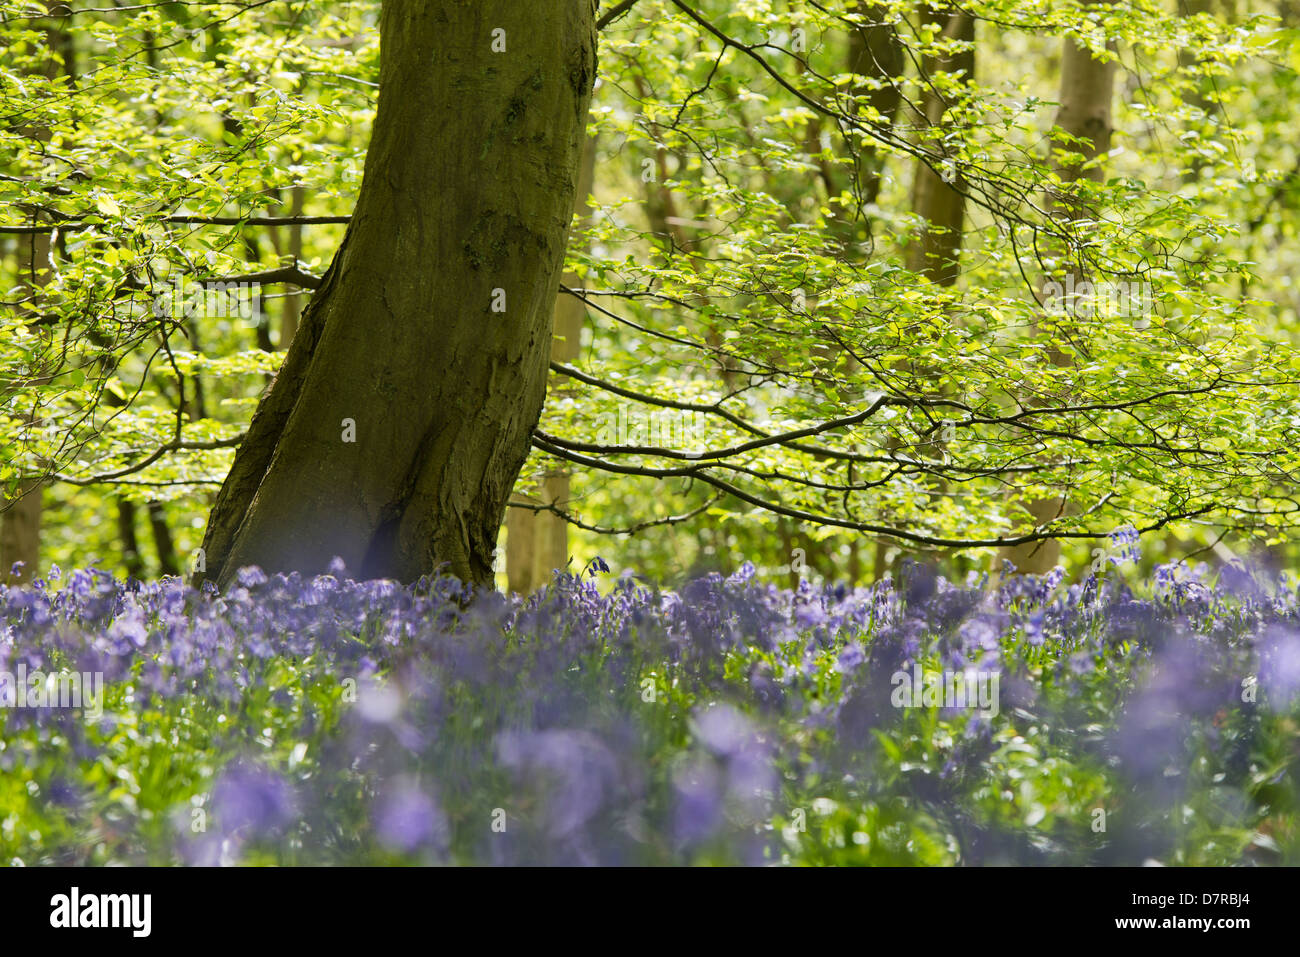 bluebells in spring, Danbury, Essex, England, United Kingdom. Close up with blurred background of woodland ecology in its natural relaxing environment Stock Photo